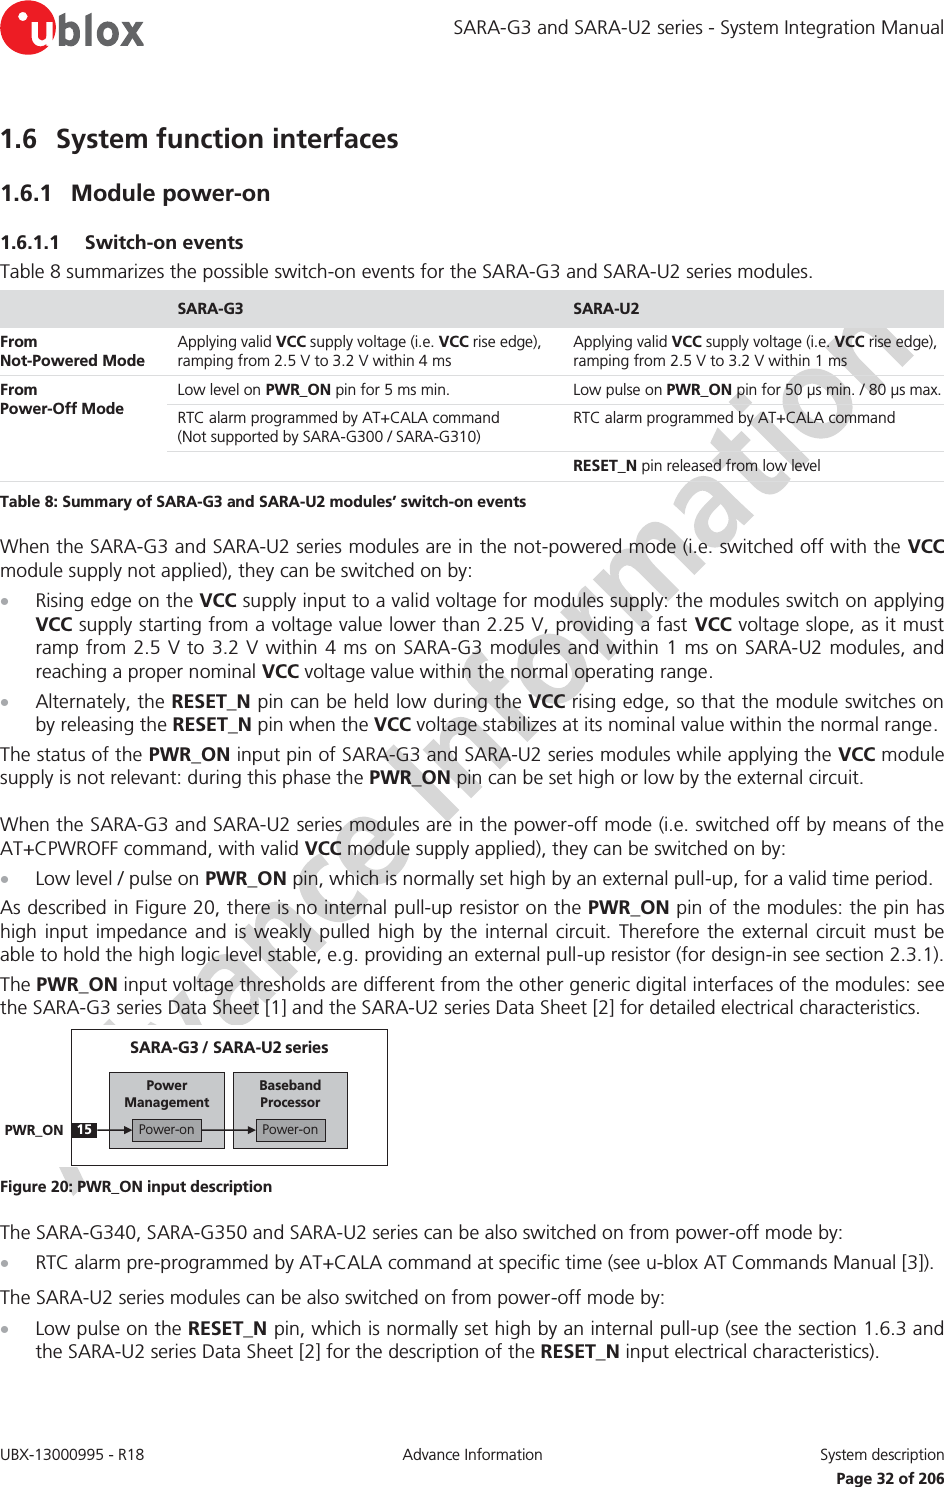 SARA-G3 and SARA-U2 series - System Integration Manual UBX-13000995 - R18  Advance Information  System description   Page 32 of 206 1.6 System function interfaces 1.6.1 Module power-on 1.6.1.1 Switch-on events Table 8 summarizes the possible switch-on events for the SARA-G3 and SARA-U2 series modules.  SARA-G3  SARA-U2 From Not-Powered Mode Applying valid VCC supply voltage (i.e. VCC rise edge), ramping from 2.5 V to 3.2 V within 4 ms Applying valid VCC supply voltage (i.e. VCC rise edge), ramping from 2.5 V to 3.2 V within 1 ms From  Power-Off Mode Low level on PWR_ON pin for 5 ms min.  Low pulse on PWR_ON pin for 50 μs min. / 80 μs max. RTC alarm programmed by AT+CALA command (Not supported by SARA-G300 / SARA-G310)  RTC alarm programmed by AT+CALA command    RESET_N pin released from low level Table 8: Summary of SARA-G3 and SARA-U2 modules’ switch-on events When the SARA-G3 and SARA-U2 series modules are in the not-powered mode (i.e. switched off with the VCC module supply not applied), they can be switched on by: x Rising edge on the VCC supply input to a valid voltage for modules supply: the modules switch on applying VCC supply starting from a voltage value lower than 2.25 V, providing a fast VCC voltage slope, as it must ramp from 2.5 V to 3.2 V within 4 ms on SARA-G3 modules and within 1 ms on SARA-U2 modules, and reaching a proper nominal VCC voltage value within the normal operating range. x Alternately, the RESET_N pin can be held low during the VCC rising edge, so that the module switches on by releasing the RESET_N pin when the VCC voltage stabilizes at its nominal value within the normal range. The status of the PWR_ON input pin of SARA-G3 and SARA-U2 series modules while applying the VCC module supply is not relevant: during this phase the PWR_ON pin can be set high or low by the external circuit. When the SARA-G3 and SARA-U2 series modules are in the power-off mode (i.e. switched off by means of the AT+CPWROFF command, with valid VCC module supply applied), they can be switched on by: x Low level / pulse on PWR_ON pin, which is normally set high by an external pull-up, for a valid time period. As described in Figure 20, there is no internal pull-up resistor on the PWR_ON pin of the modules: the pin has high input impedance and is weakly pulled high by the internal circuit. Therefore the external circuit must be able to hold the high logic level stable, e.g. providing an external pull-up resistor (for design-in see section 2.3.1). The PWR_ON input voltage thresholds are different from the other generic digital interfaces of the modules: see the SARA-G3 series Data Sheet [1] and the SARA-U2 series Data Sheet [2] for detailed electrical characteristics. Baseband Processor15PWR_ONSARA-G3 / SARA-U2 seriesPower-onPower ManagementPower-on Figure 20: PWR_ON input description The SARA-G340, SARA-G350 and SARA-U2 series can be also switched on from power-off mode by: x RTC alarm pre-programmed by AT+CALA command at specific time (see u-blox AT Commands Manual [3]). The SARA-U2 series modules can be also switched on from power-off mode by: x Low pulse on the RESET_N pin, which is normally set high by an internal pull-up (see the section 1.6.3 and the SARA-U2 series Data Sheet [2] for the description of the RESET_N input electrical characteristics).  